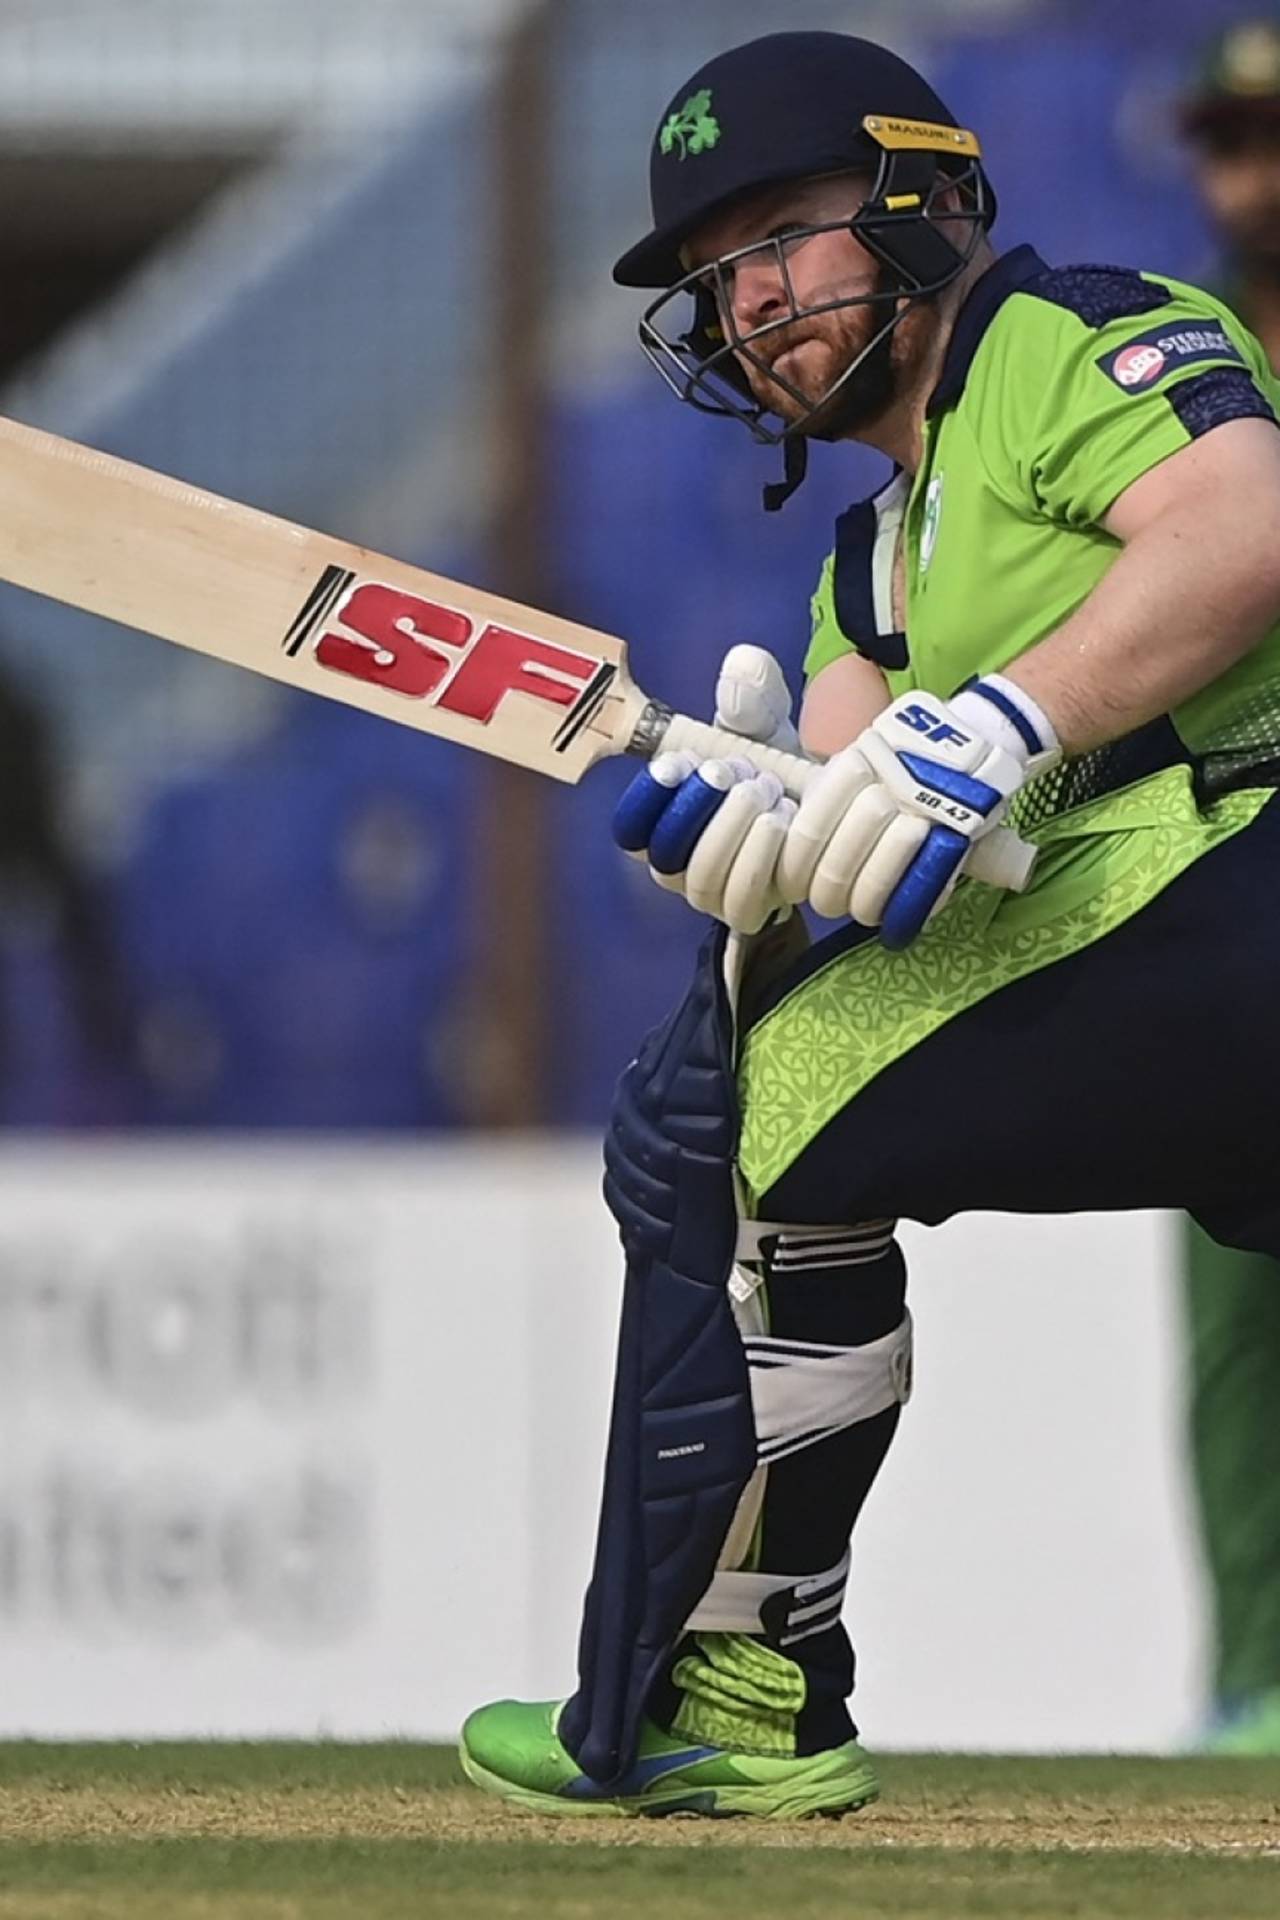 Paul Stirling was as free-flowing as ever guiding Ireland's chase, Bangladesh vs Ireland, 3rd T20I, Chattogram, March 31, 2023